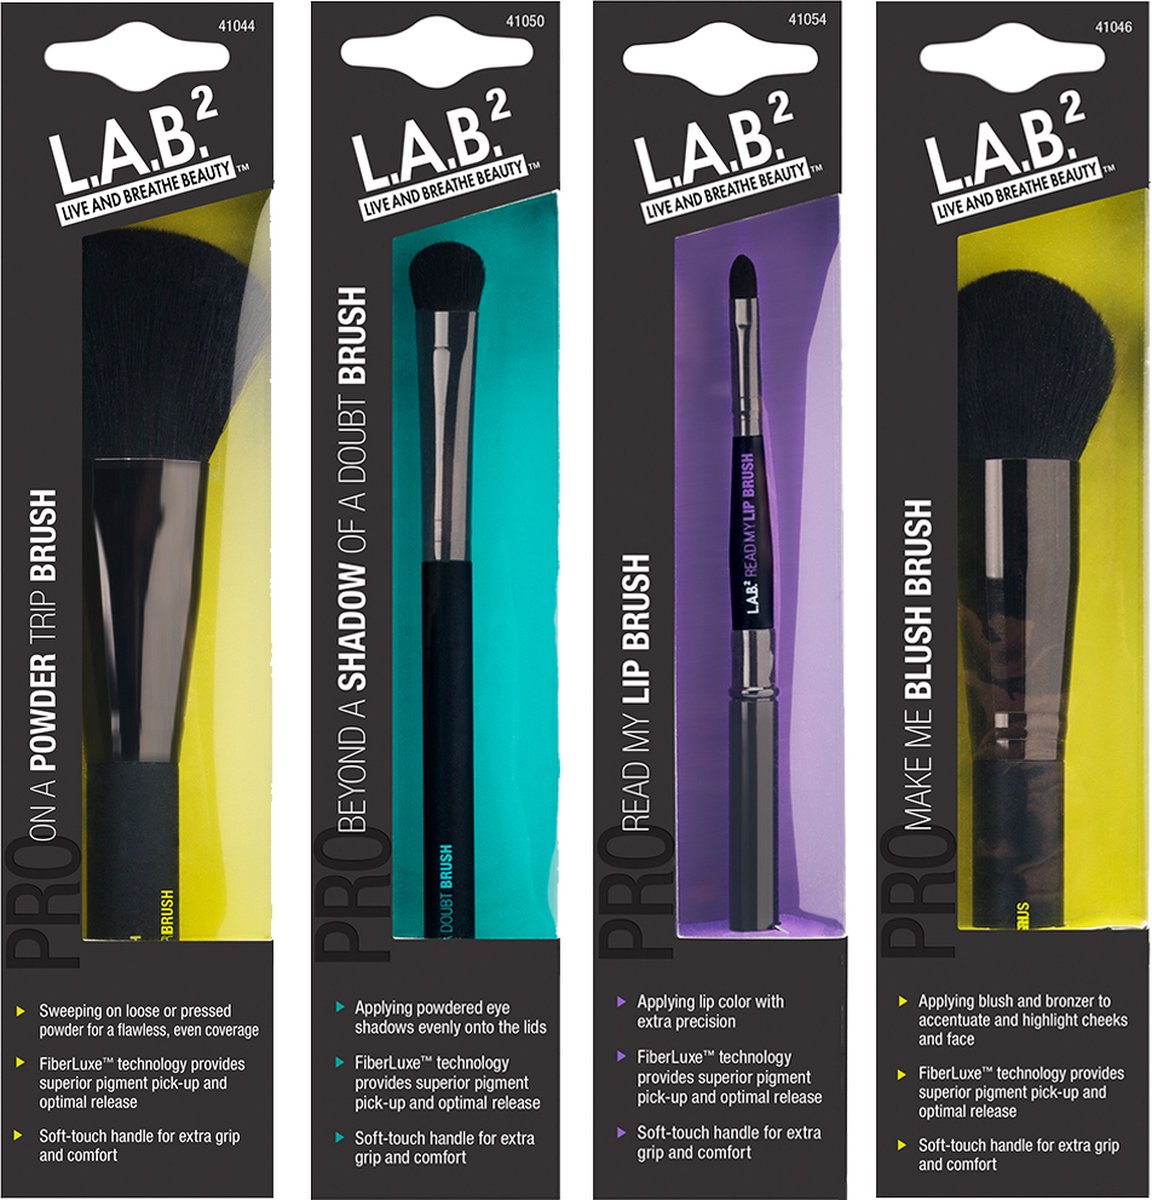 L.A.B.2 Face the Fabulous Complete Make-up Brush Voordeel Set